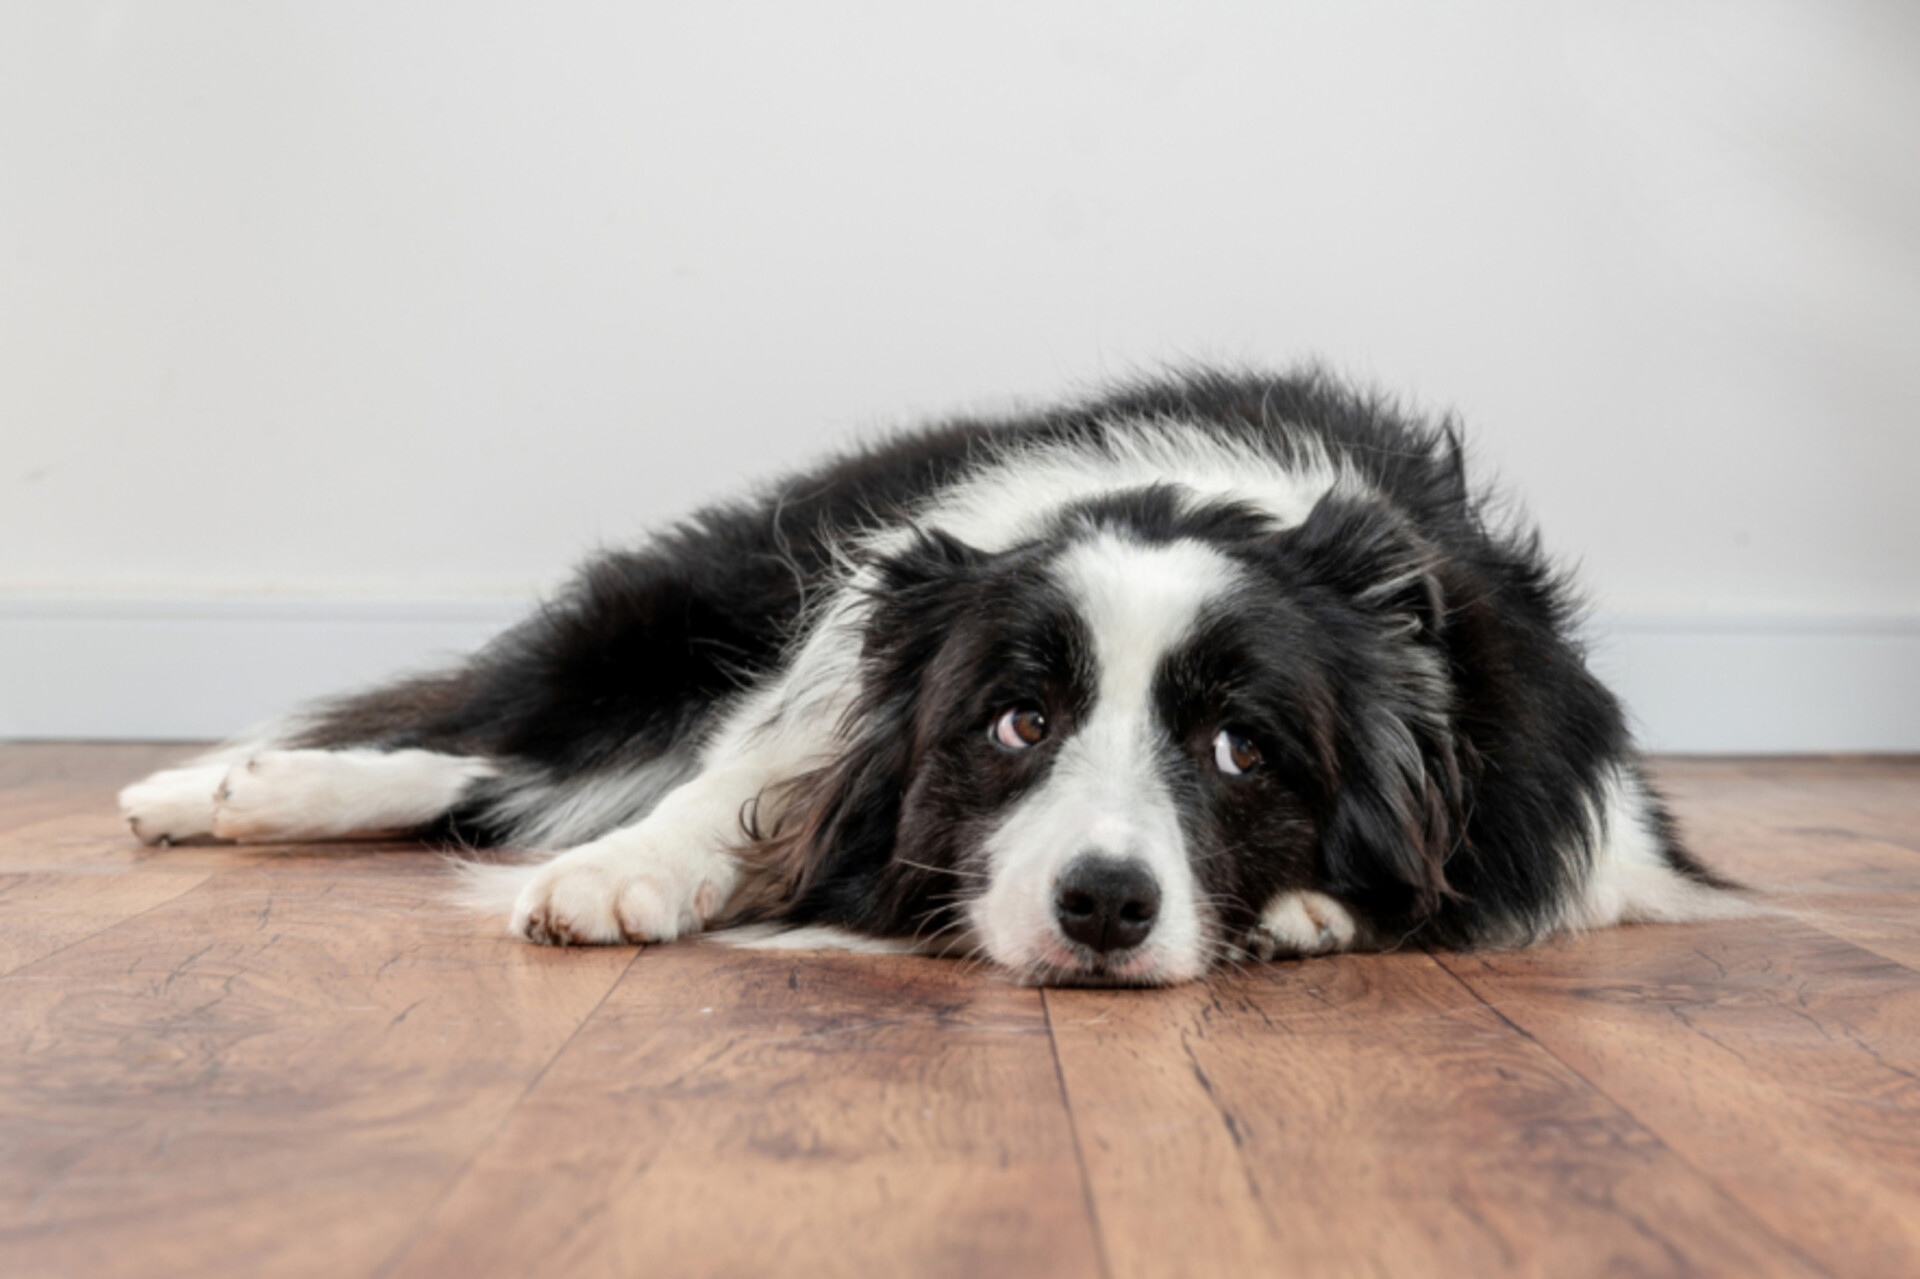 A bored Border Collie lying on a wooden floor